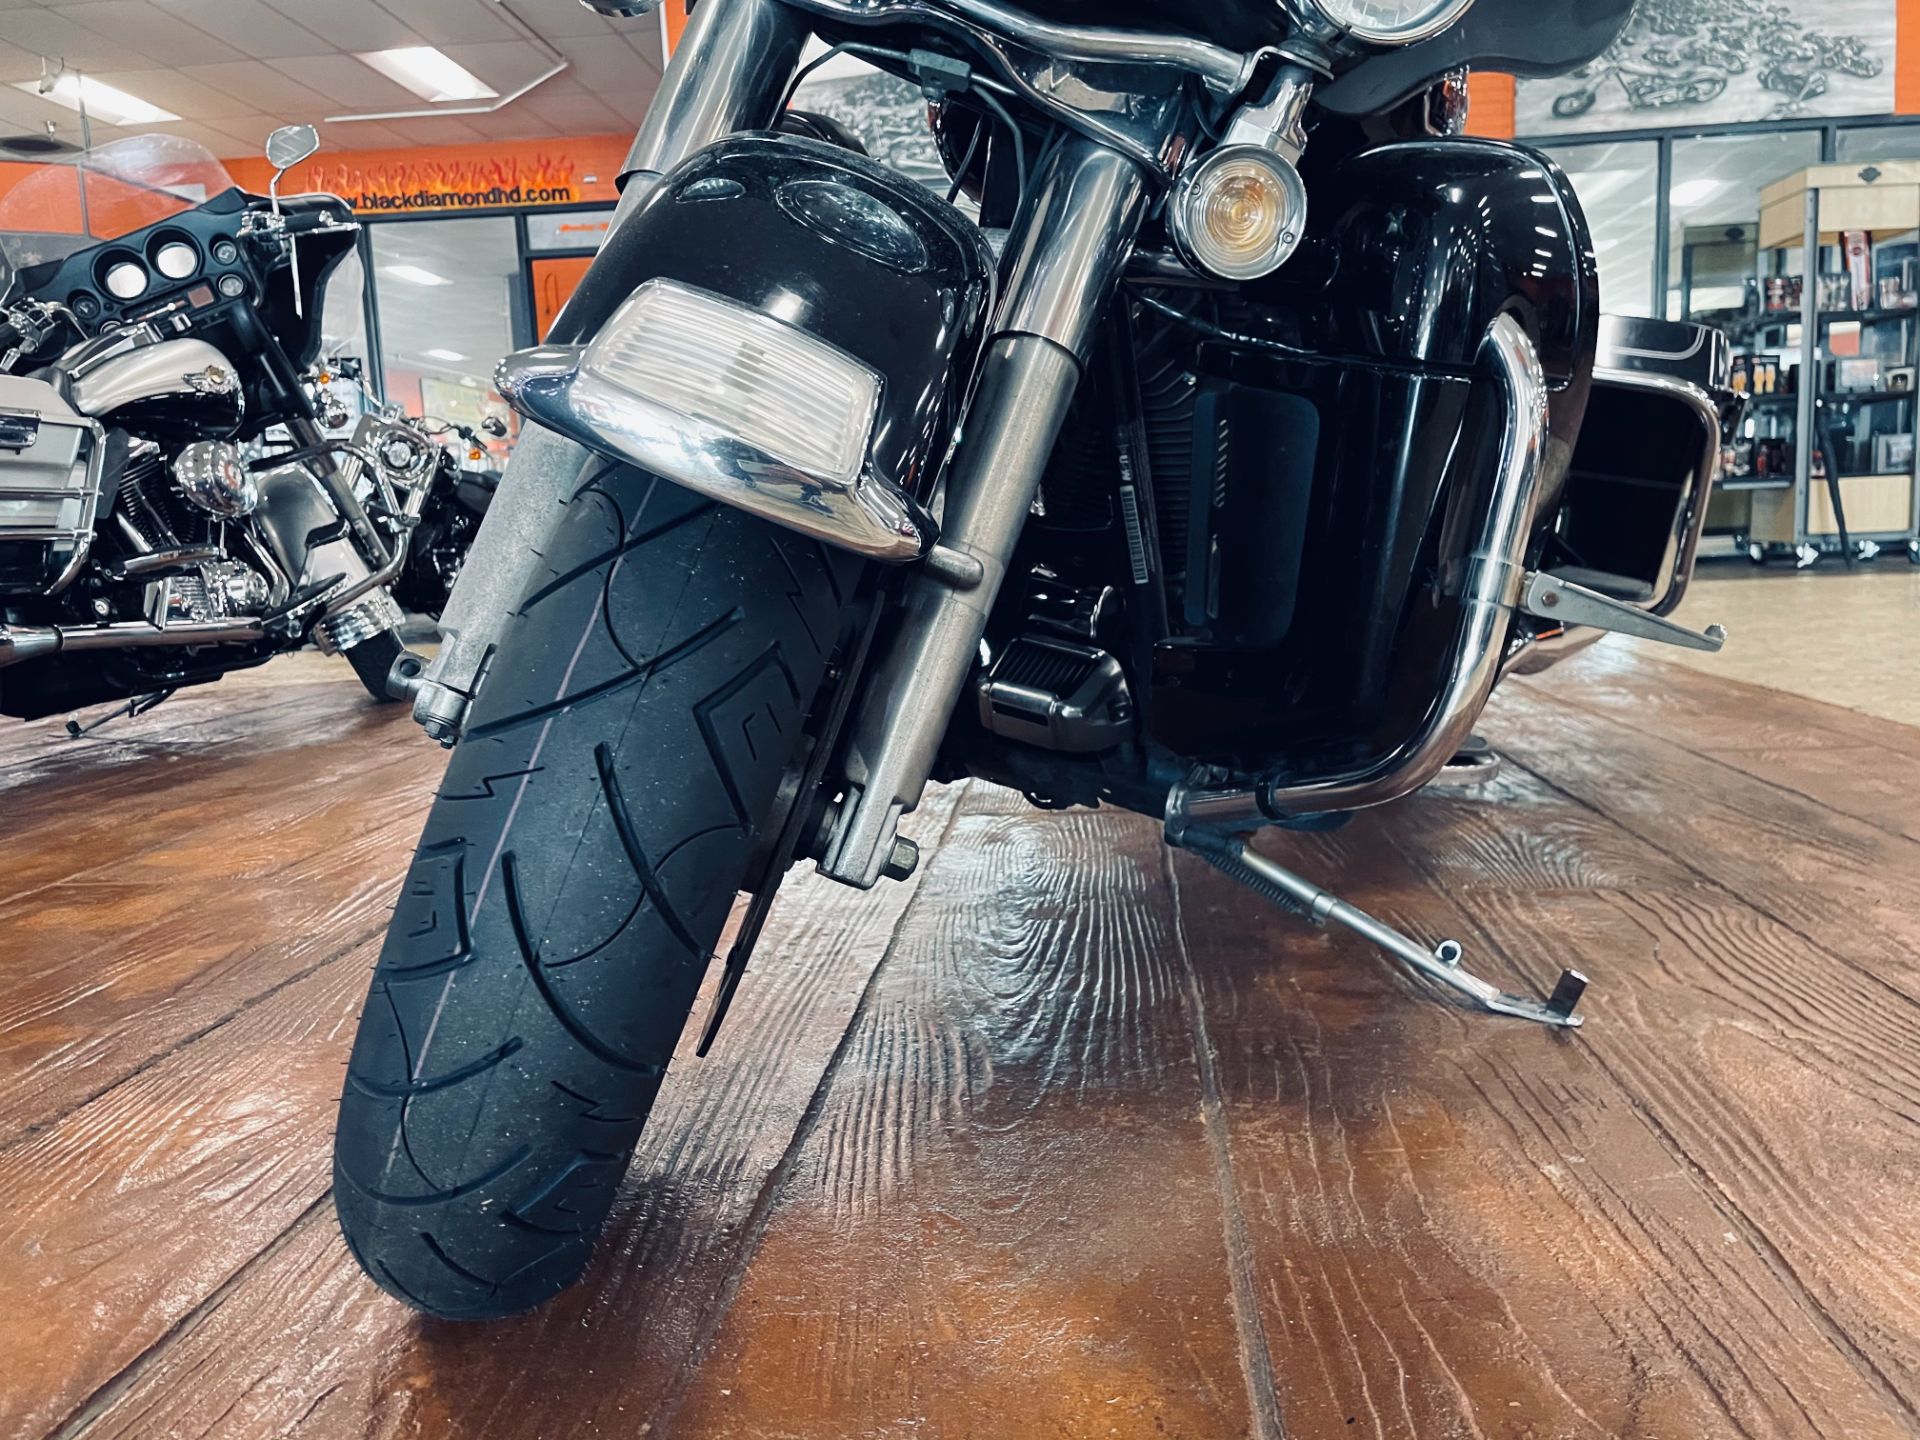 2018 Harley-Davidson Road King Special in Marion, Illinois - Photo 30